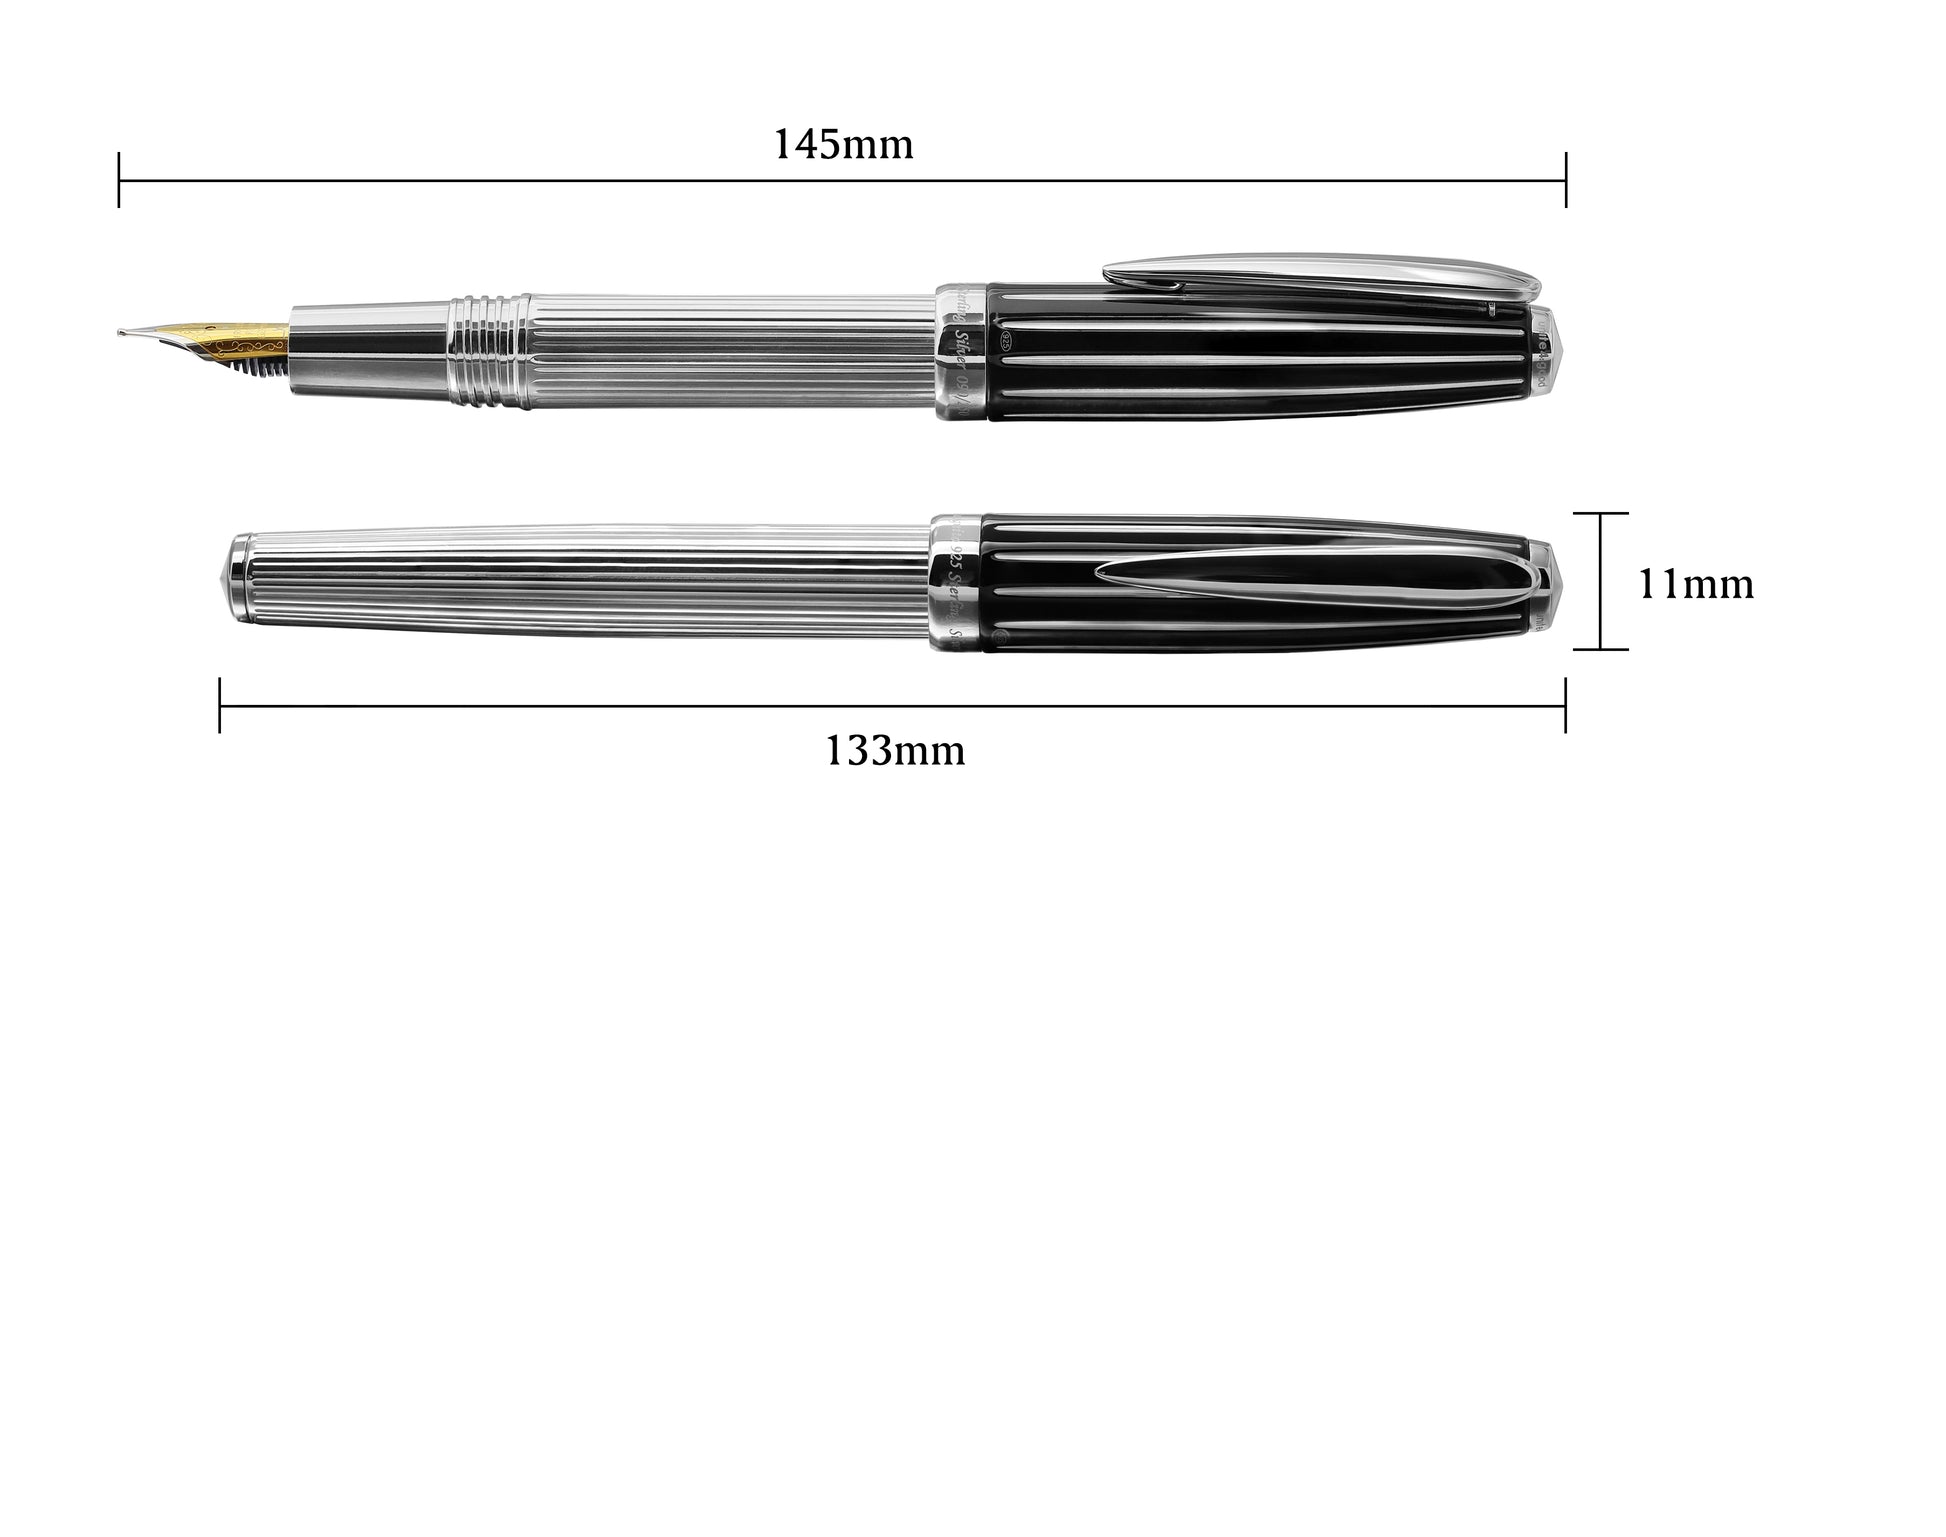 Xezo - Comparison between capped and uncapped Incognito 925 Sterling Silver F fountain pens. The uncapped fountain pen is 145 mm in length and the capped fountain pen is 133mm in length and 11mm in width.